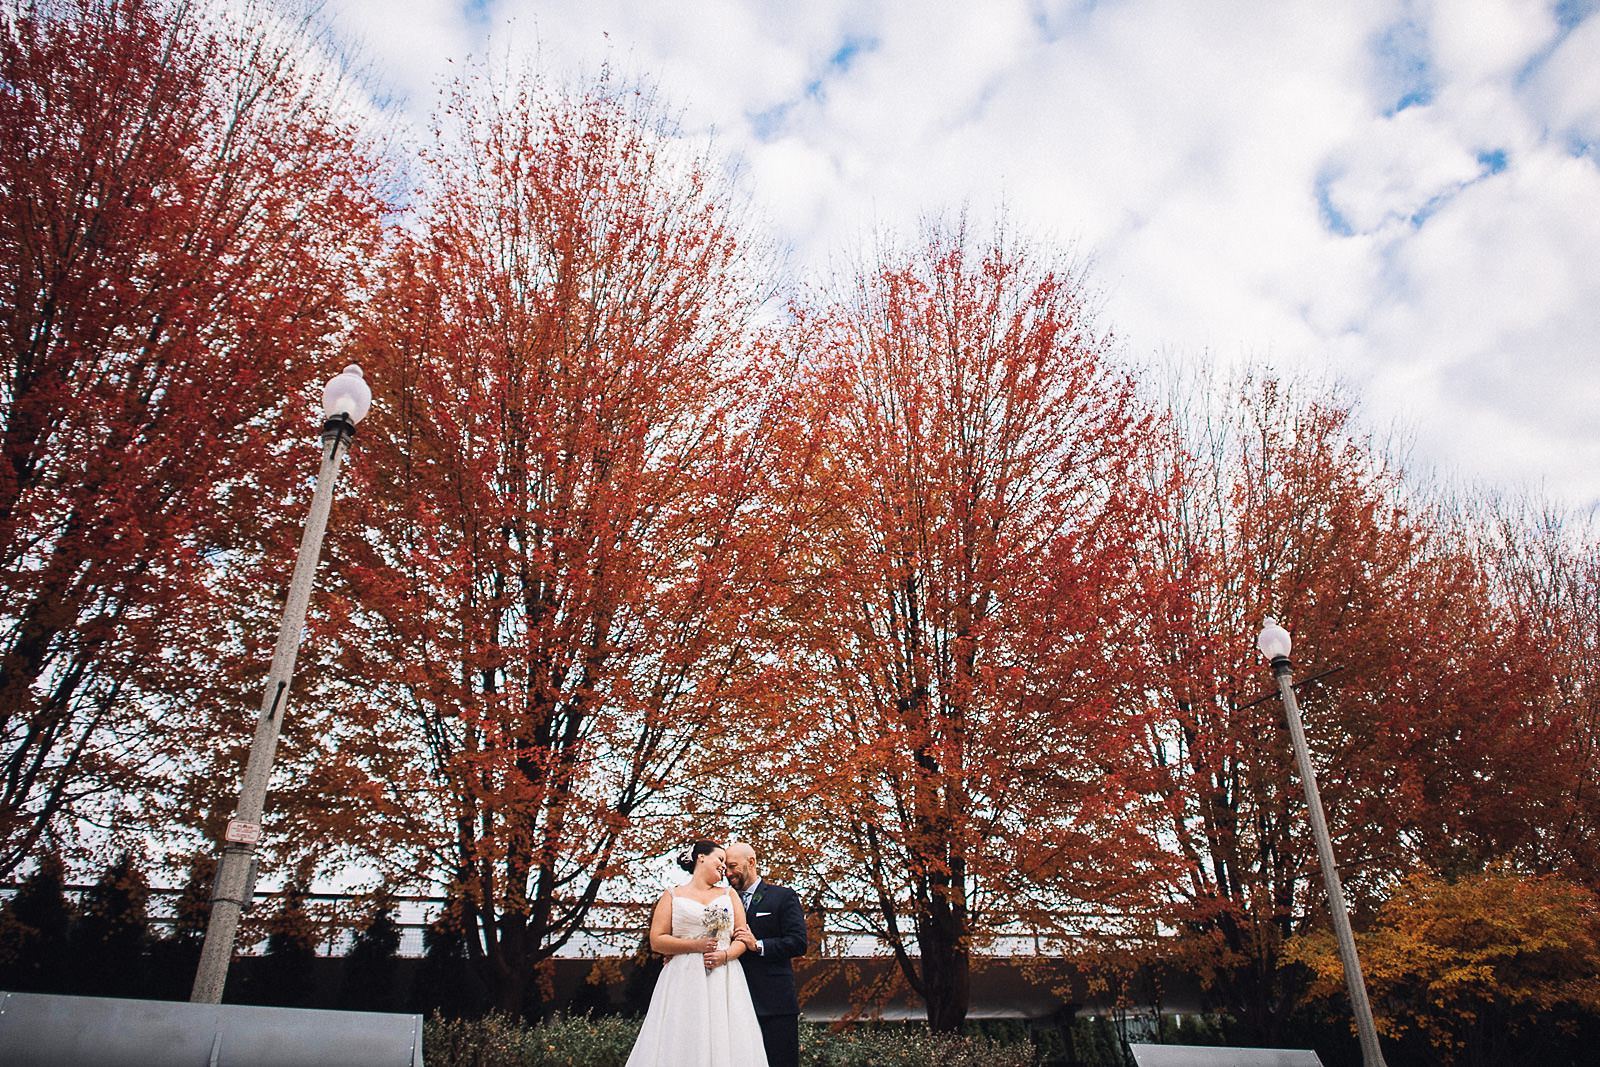 36 wedding photos in chicago in the winter - Salvatores Chicago Wedding Photos // Jen + Bob